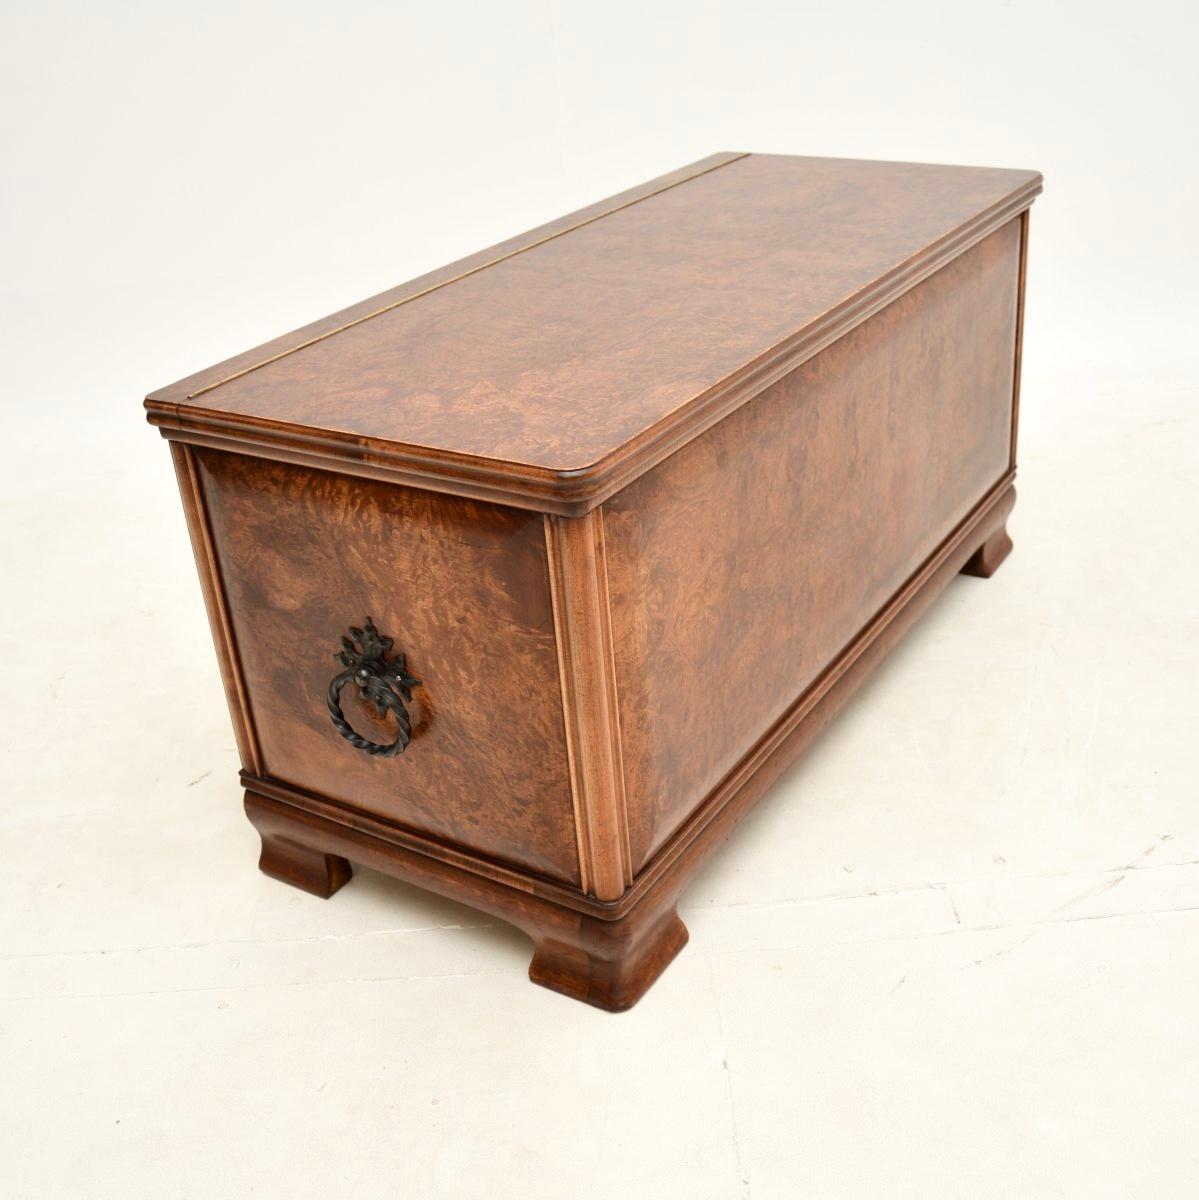 A beautiful and unusual antique burr walnut blanket chest / trunk. This was made in England, it dates from around the 1950’s.

It is of superb quality, with absolutely gorgeous burr walnut grain patterns. The front & side of this trunk has raised